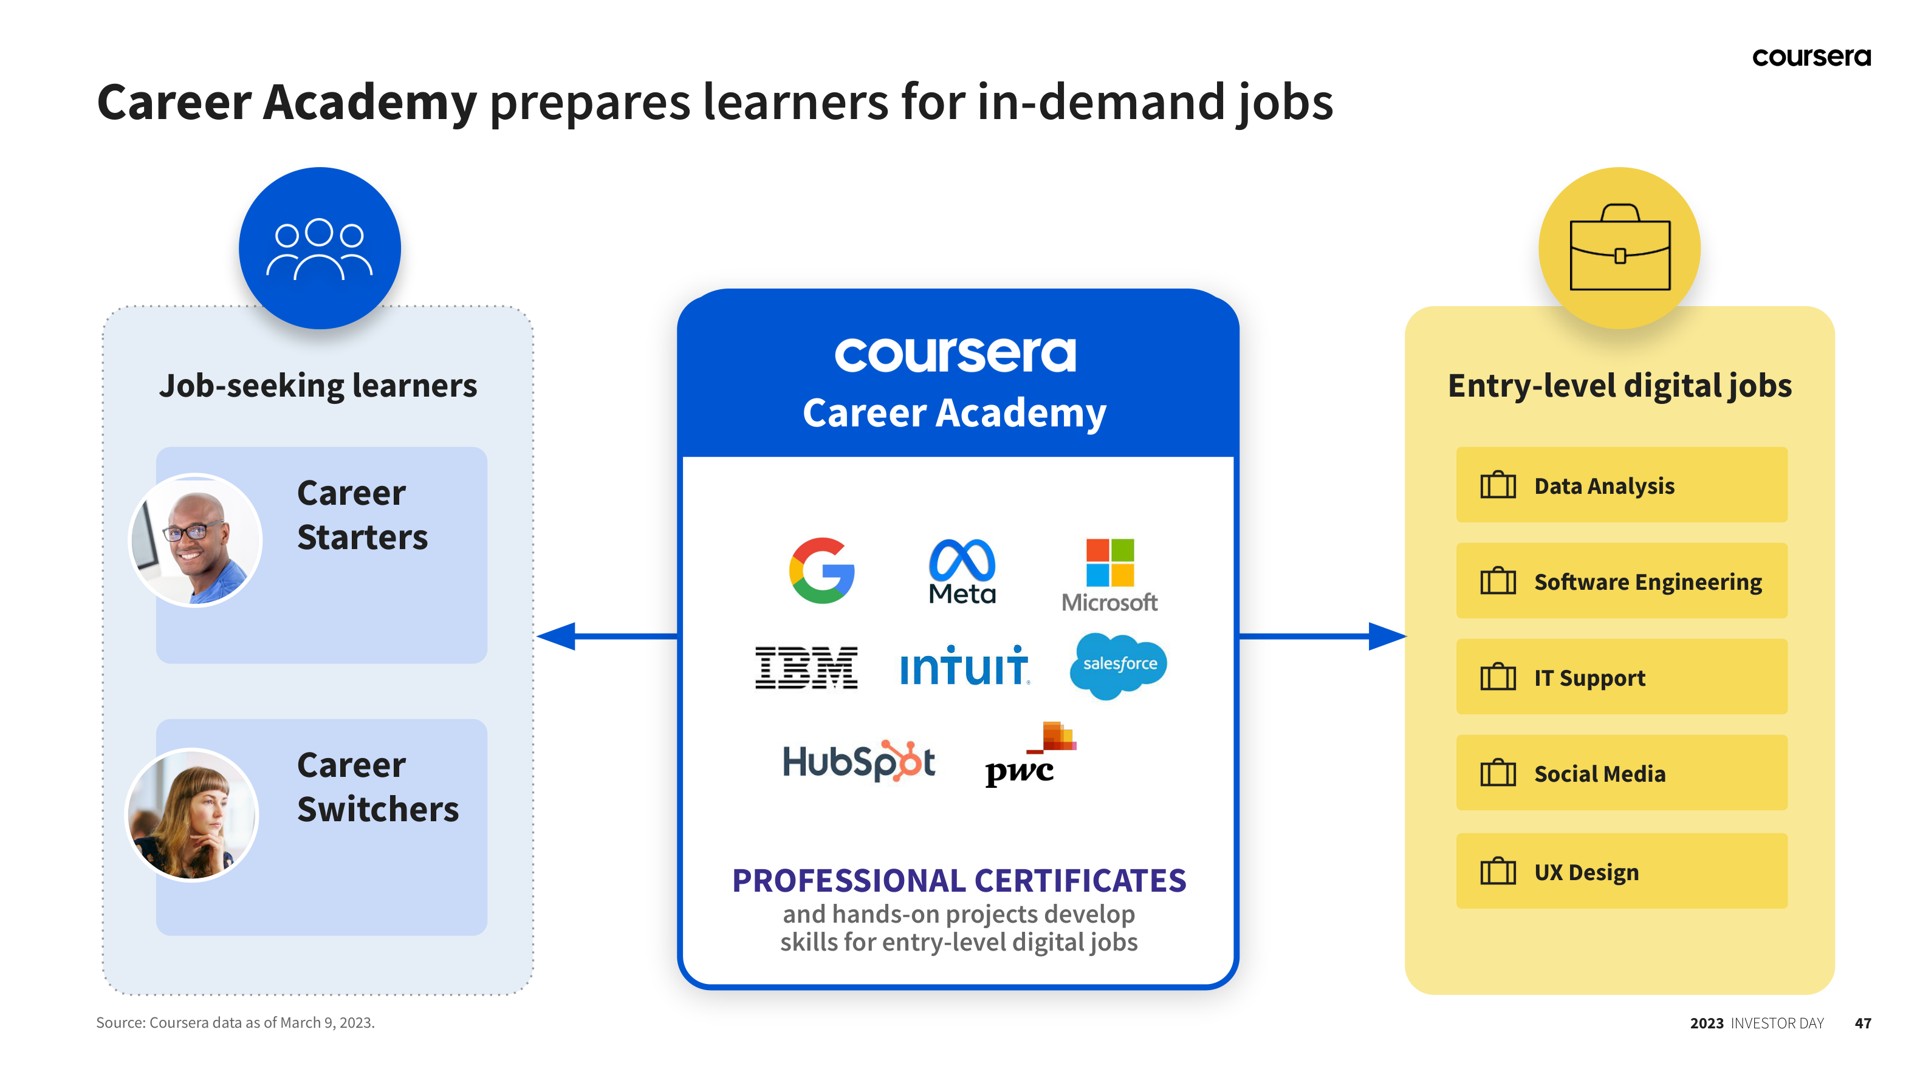 career academy prepares learners for in demand jobs career academy professional certificates design | Coursera